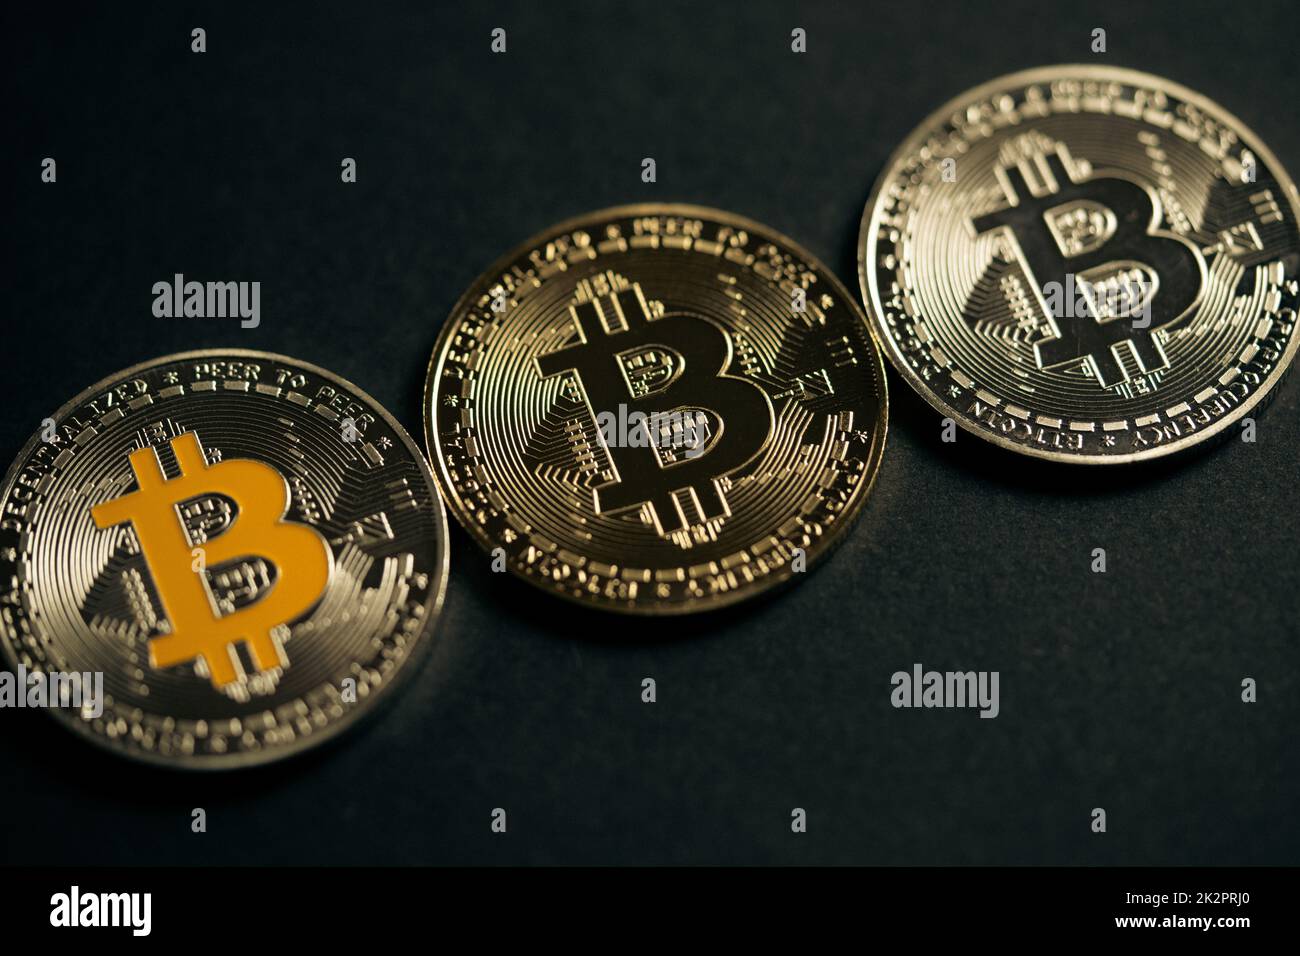 Close up shot of three aligned golden and silver bitcoin digital cryptocurrency. Stock Photo